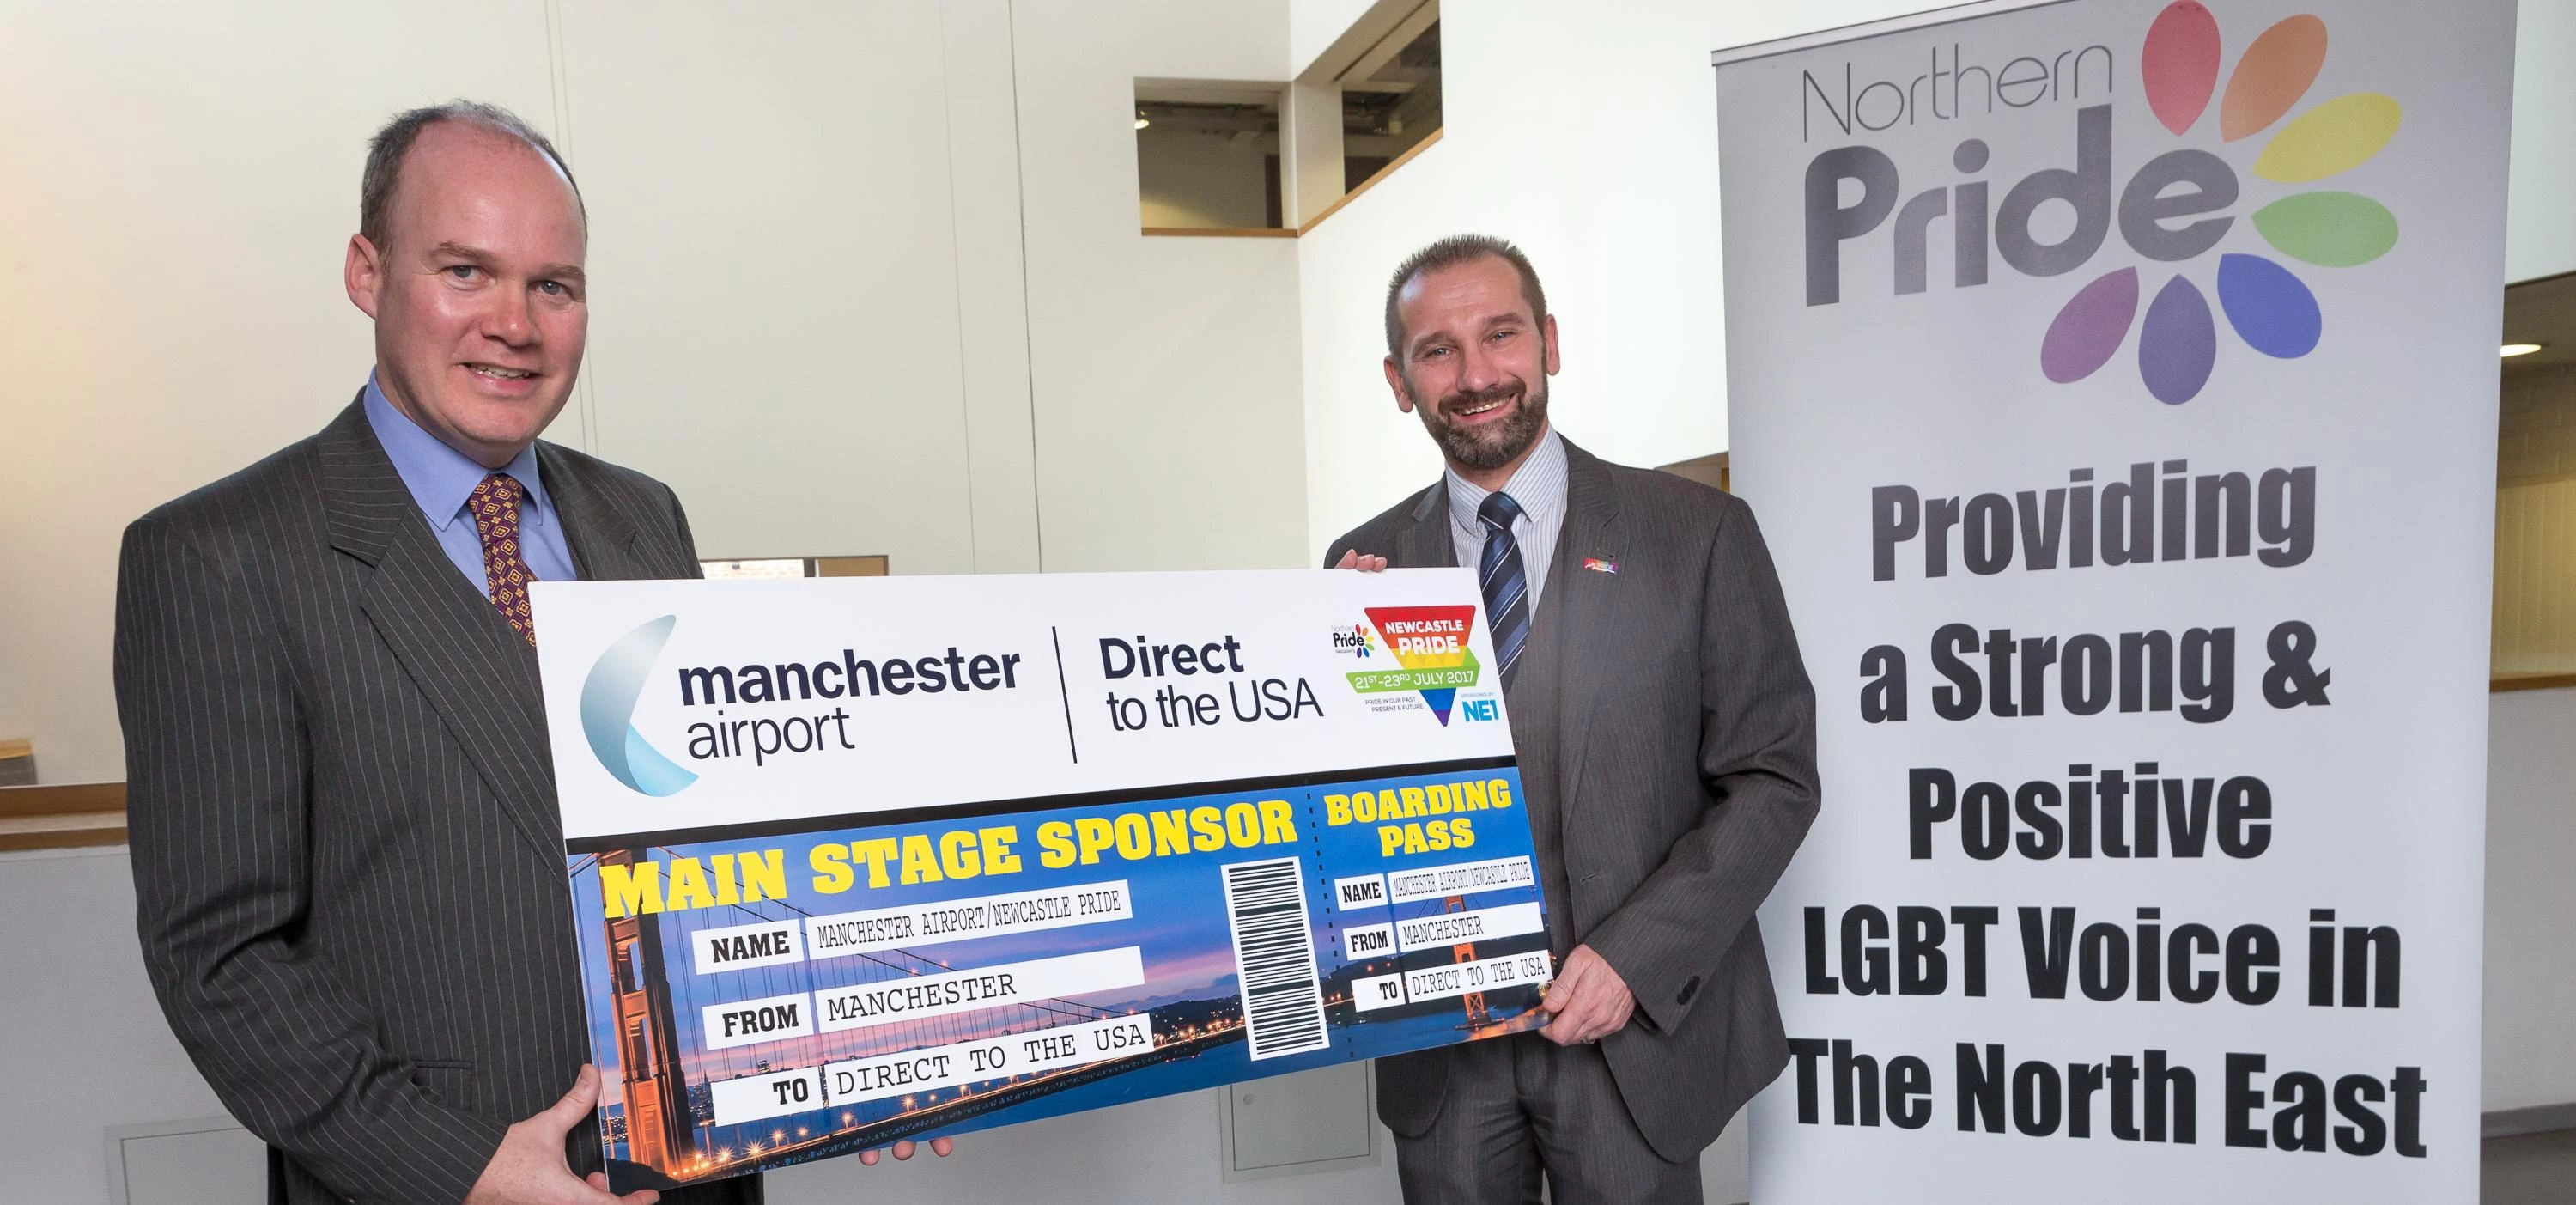 Left, Partrick Alexander Head of Marketing at Manchester Airport and Mark Nichols, chair of Northern